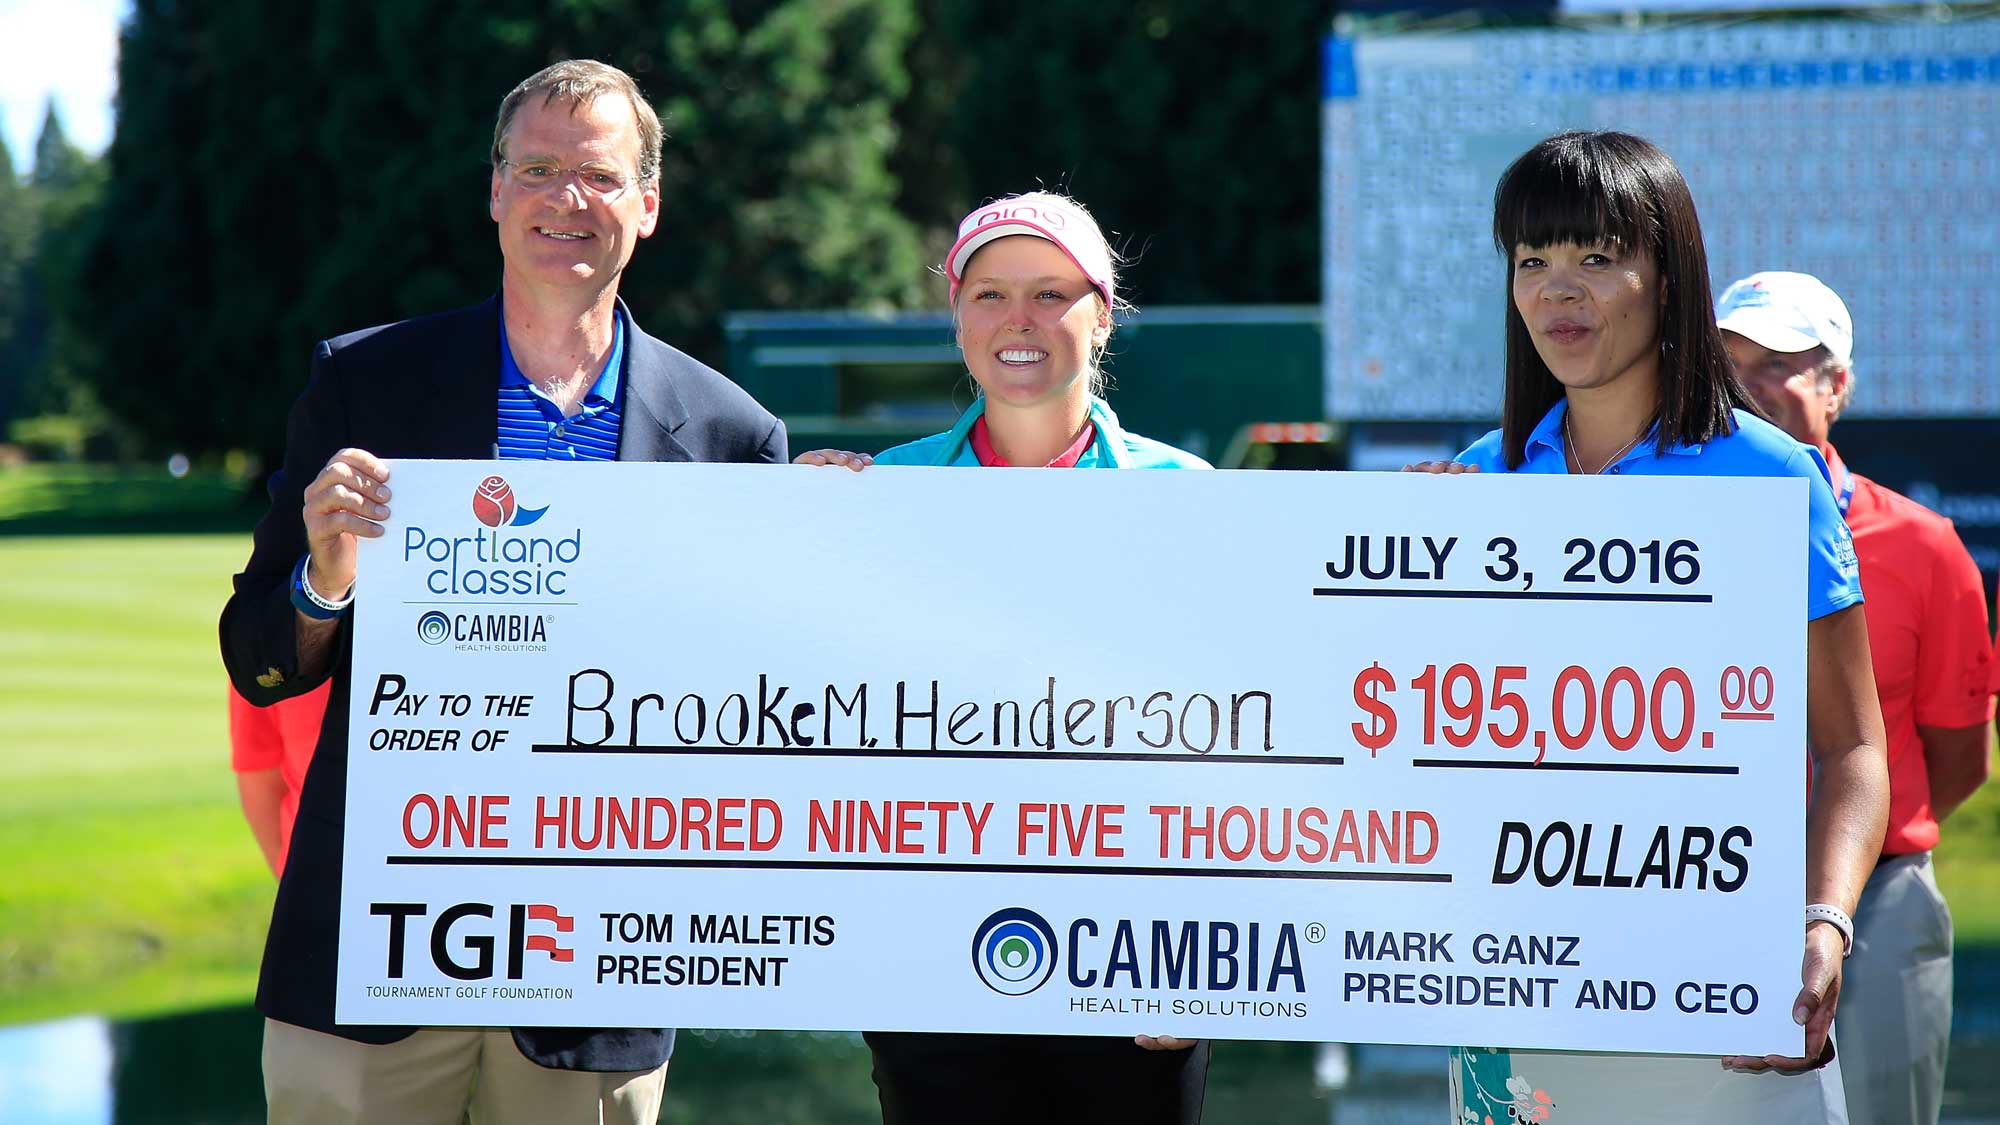 Brooke M. Henderson of Canada (C) and Mark Ganz President and CEO of Cambia (L) hold the winner's check after the fourth and final round of the Cambia Portland Classic